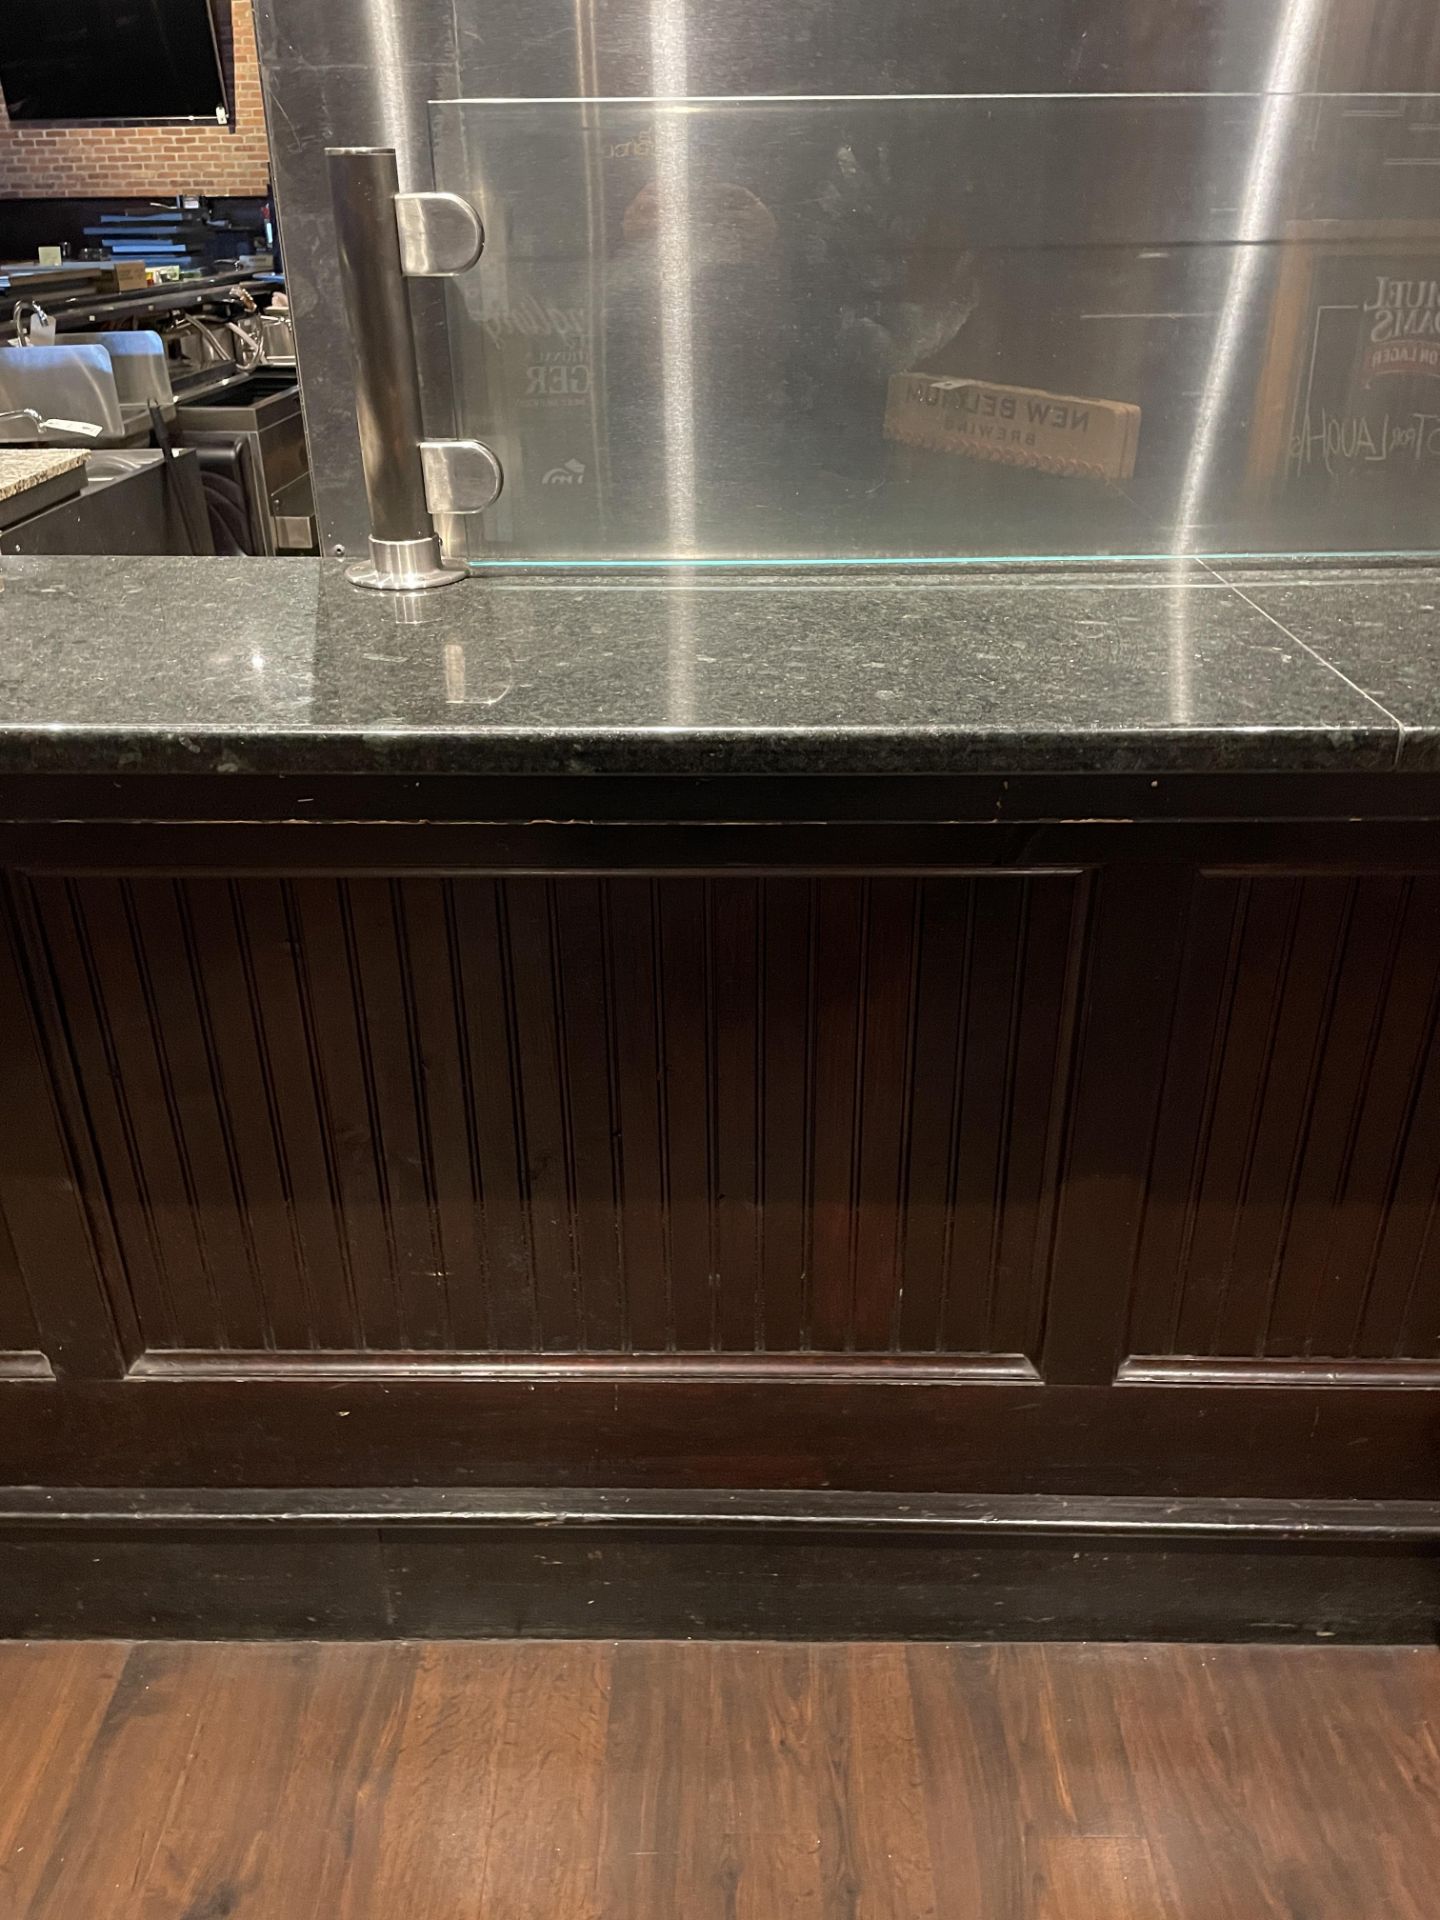 L Shaped Granite Top Wood Front Bar 21'+16'+8'x18" Depth w/ Wood Step Down and (3) wood Columns - Image 2 of 3